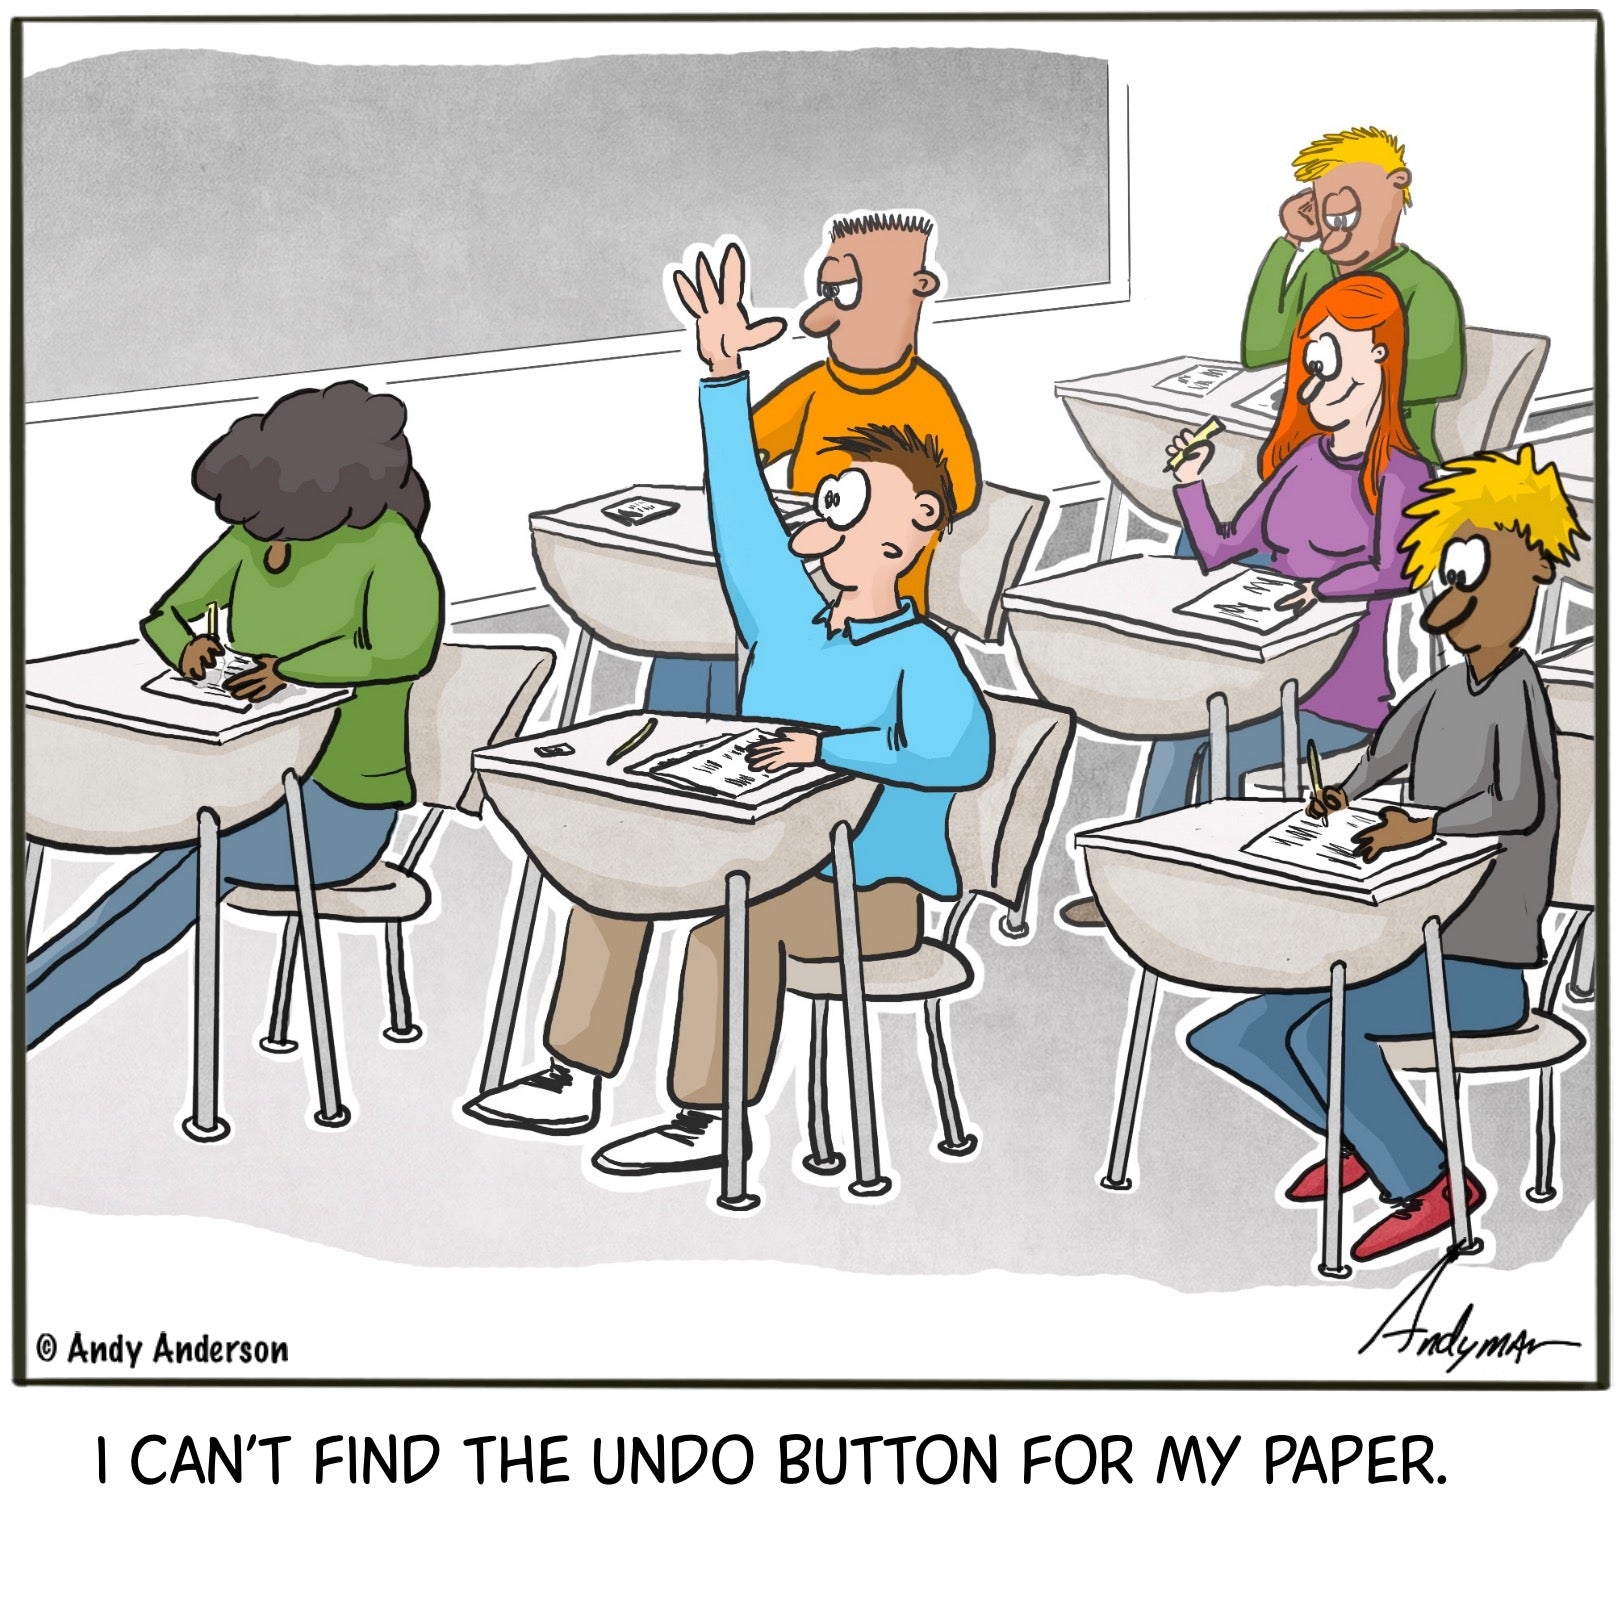 Can't find my undo button for my paper cartoon by Andy Anderson